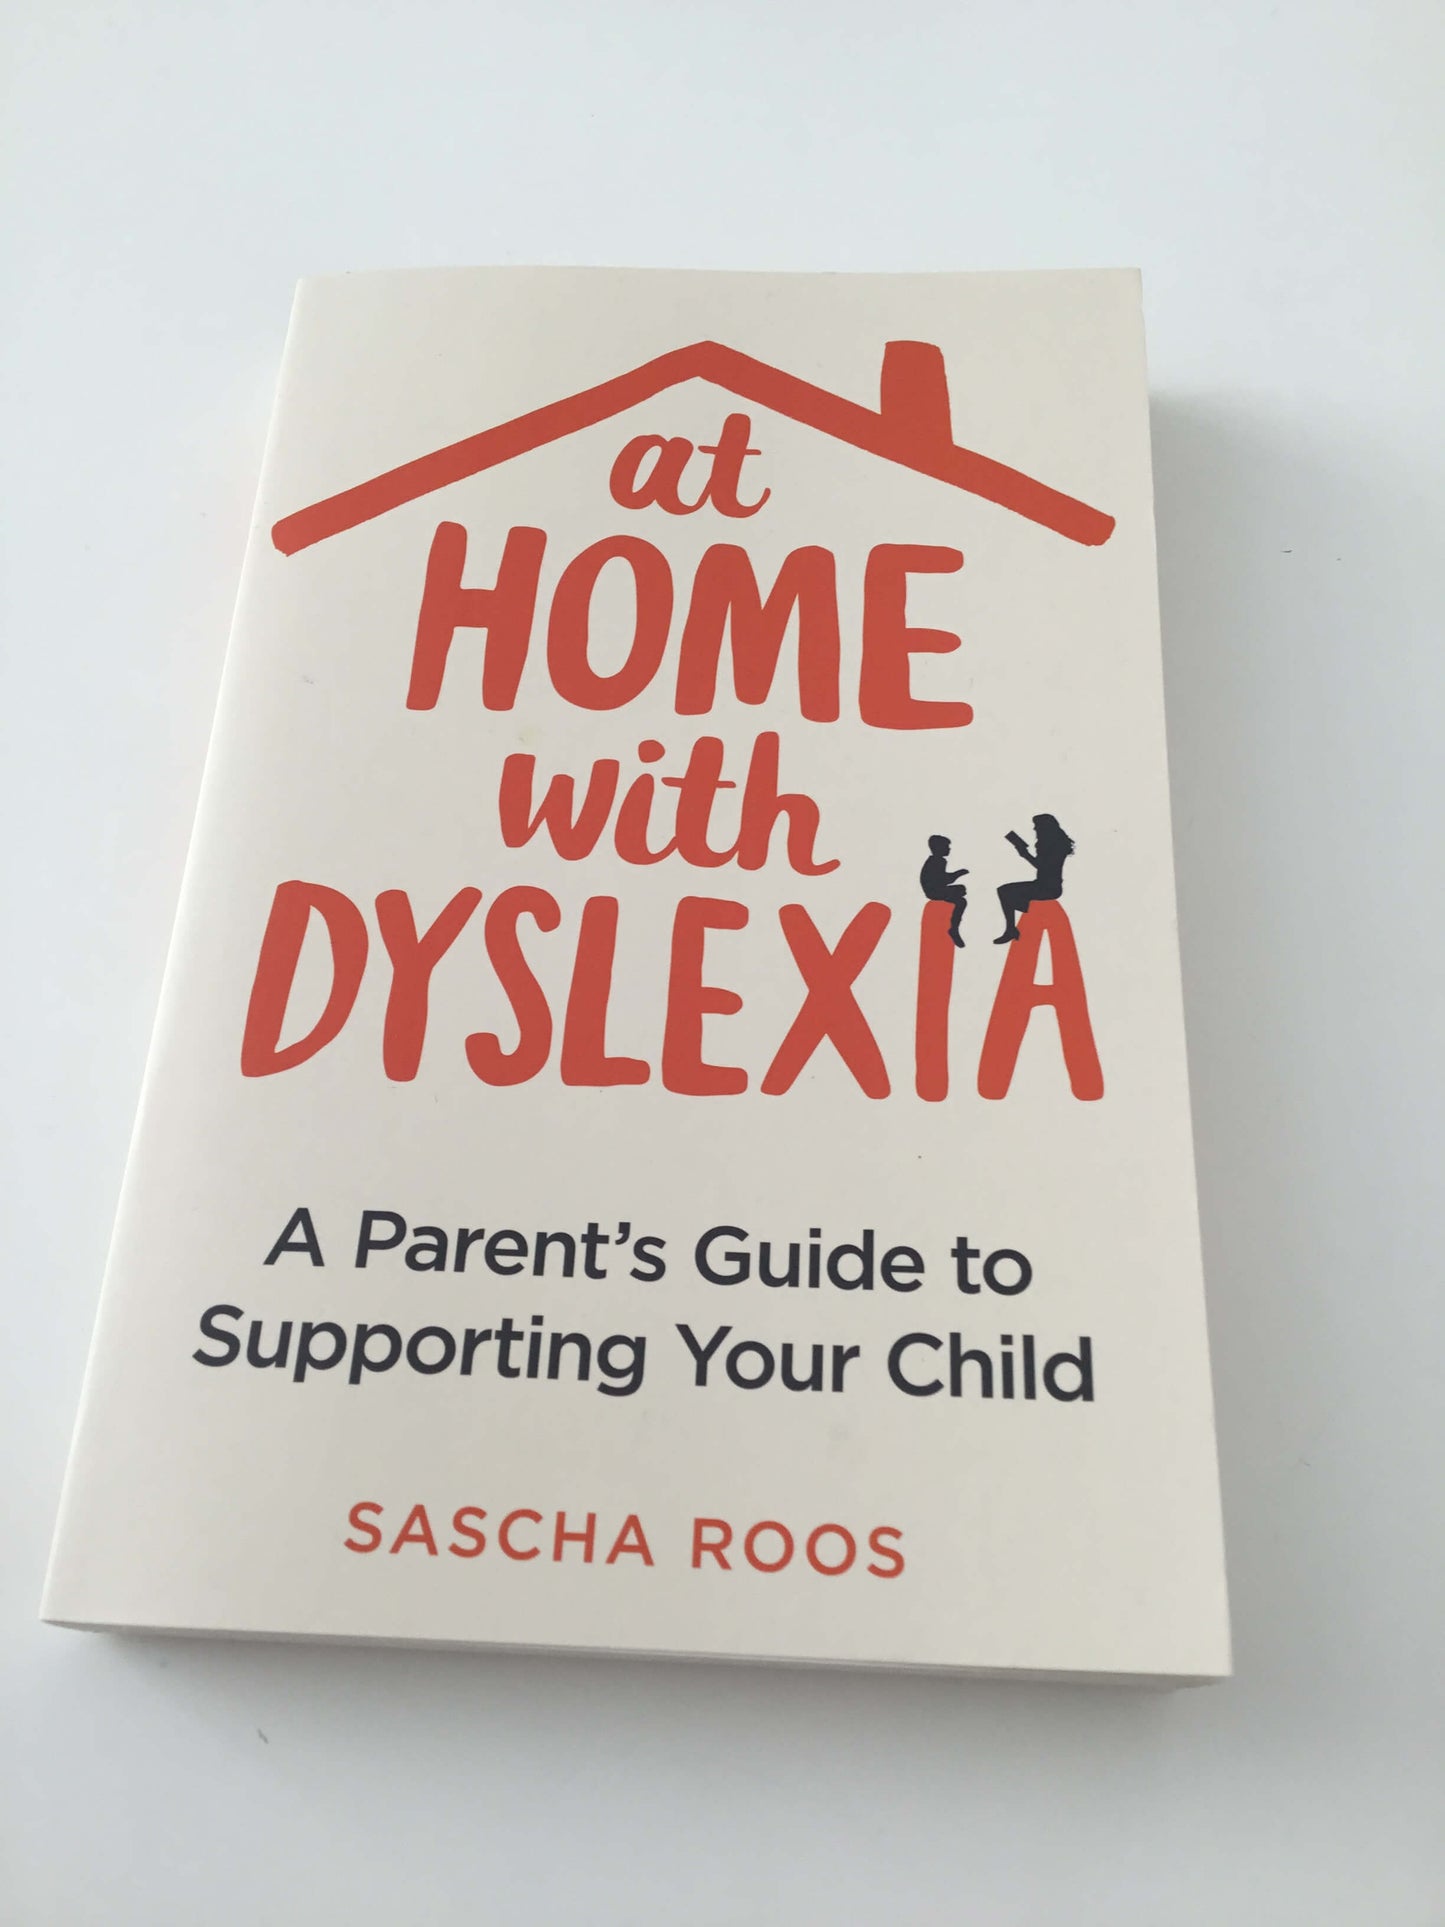 At Home with Dyslexia - A Parent’s Guide to Supporting your Child by Sasha Roots